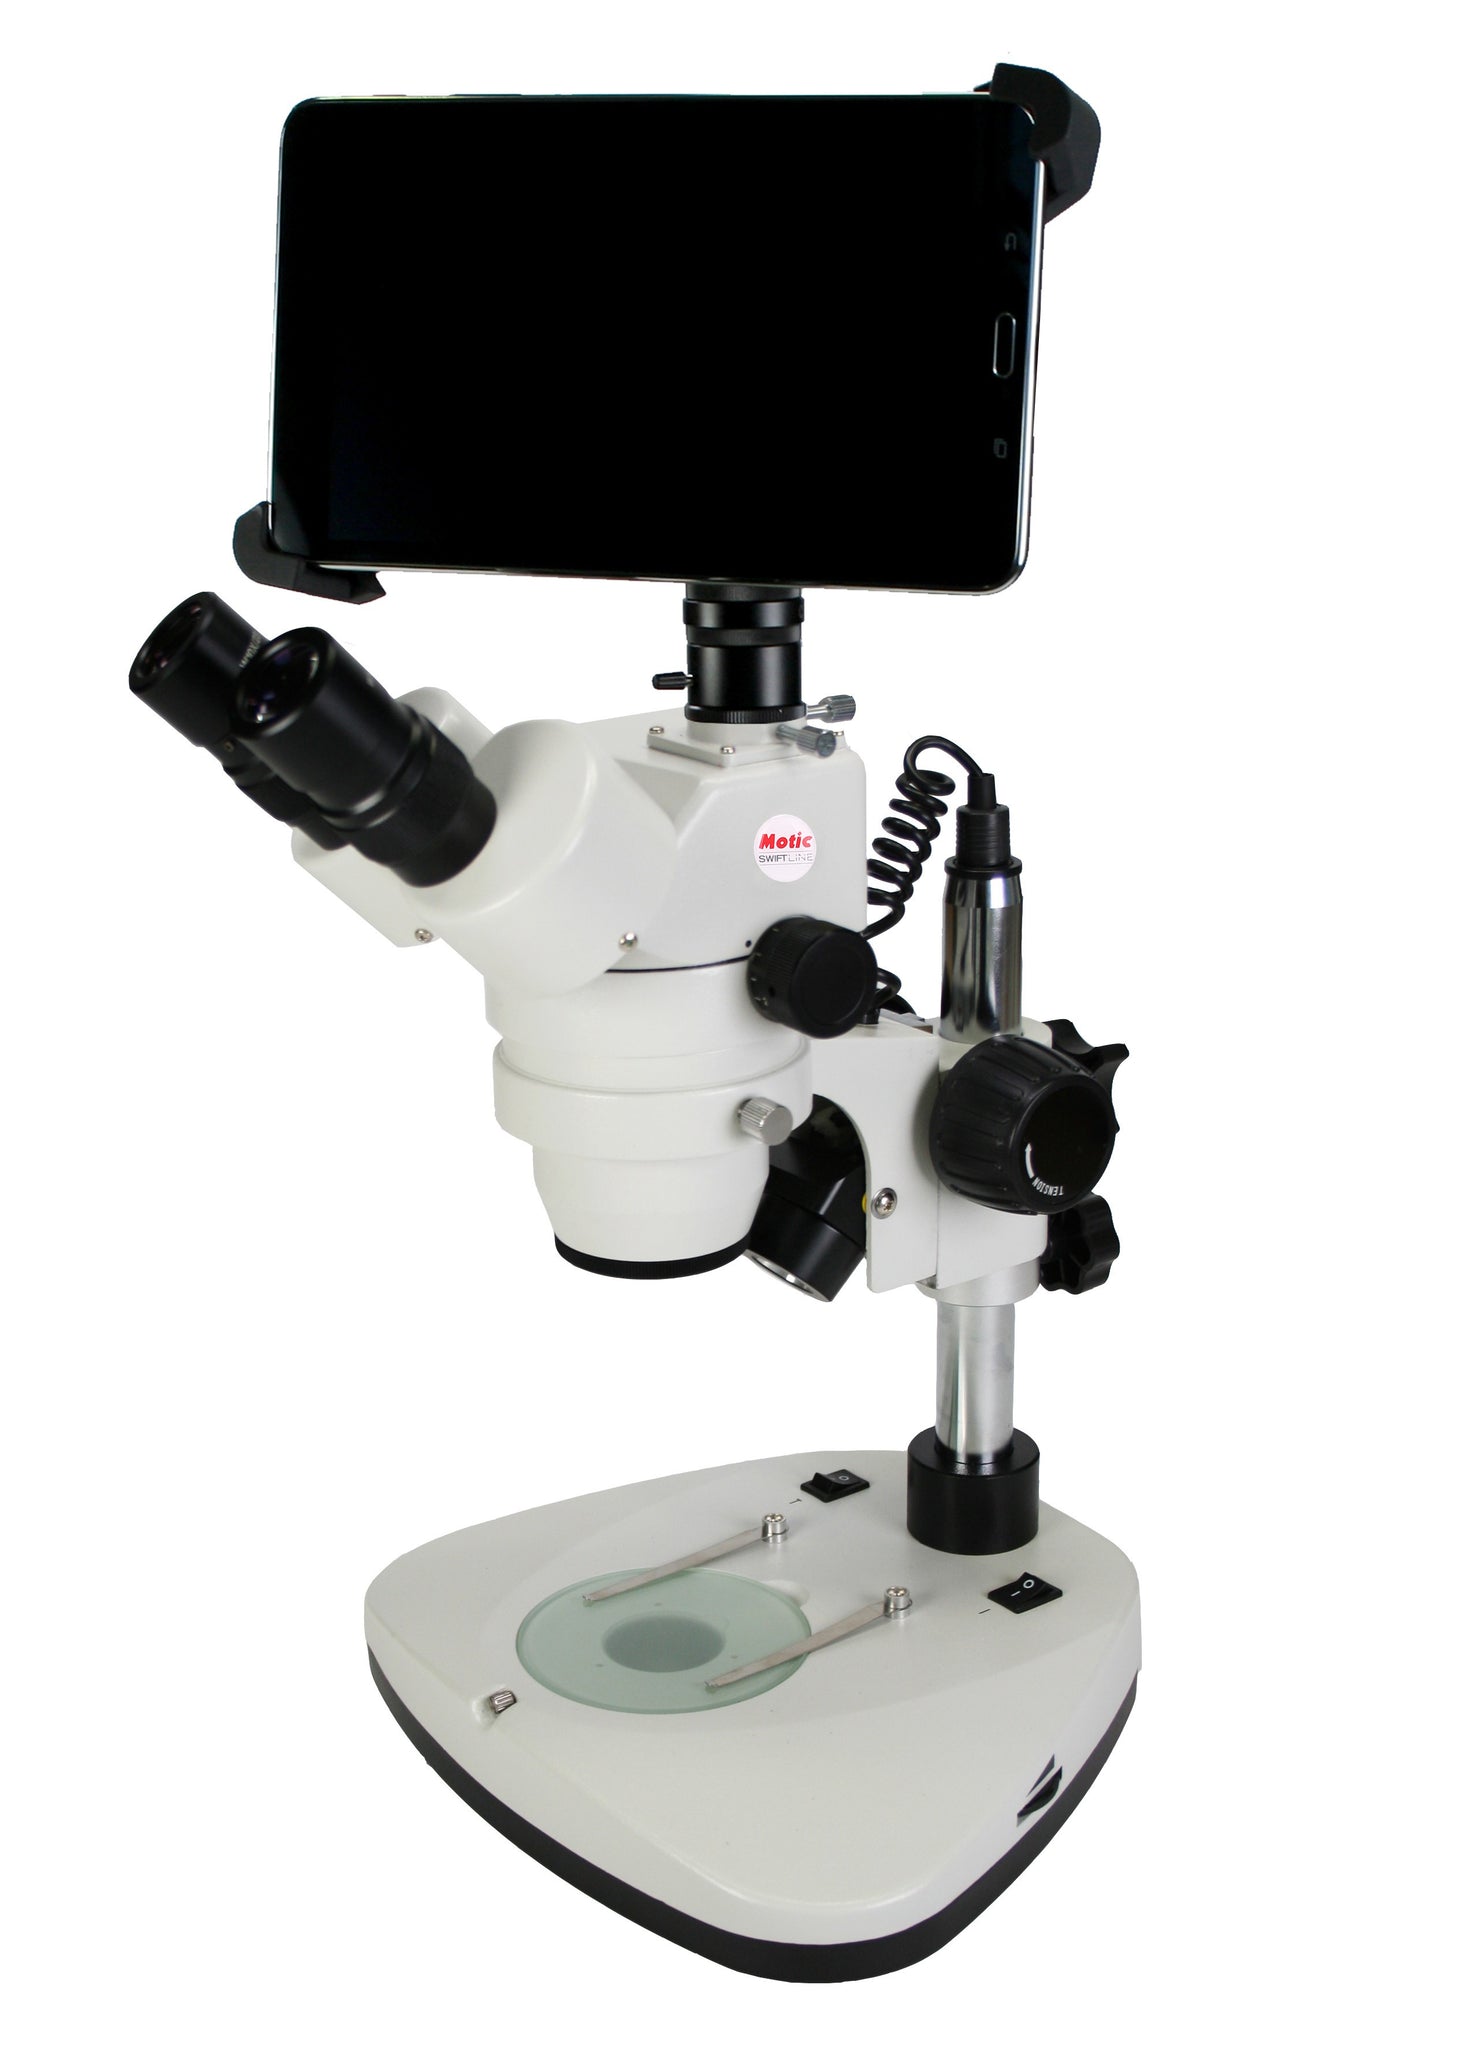 Swift M29 Zoom Stereo Microscope (1X-4X) with 10" Tablet